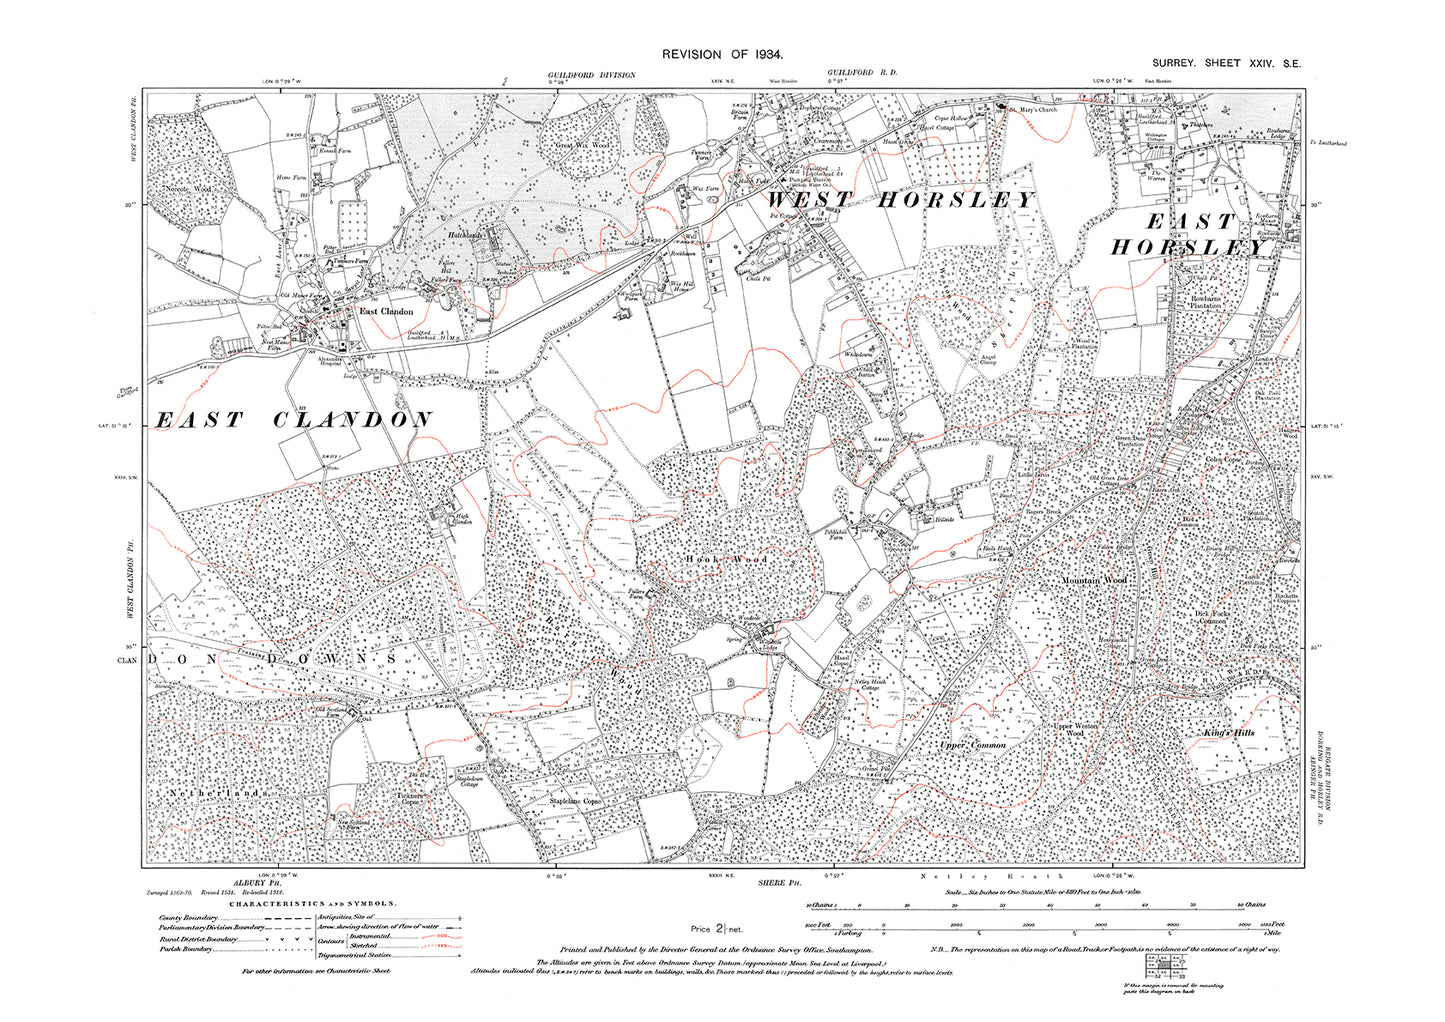 East Clandon, West Horsley (south), East Horsley (south) old map Surrey 1934: 24SE